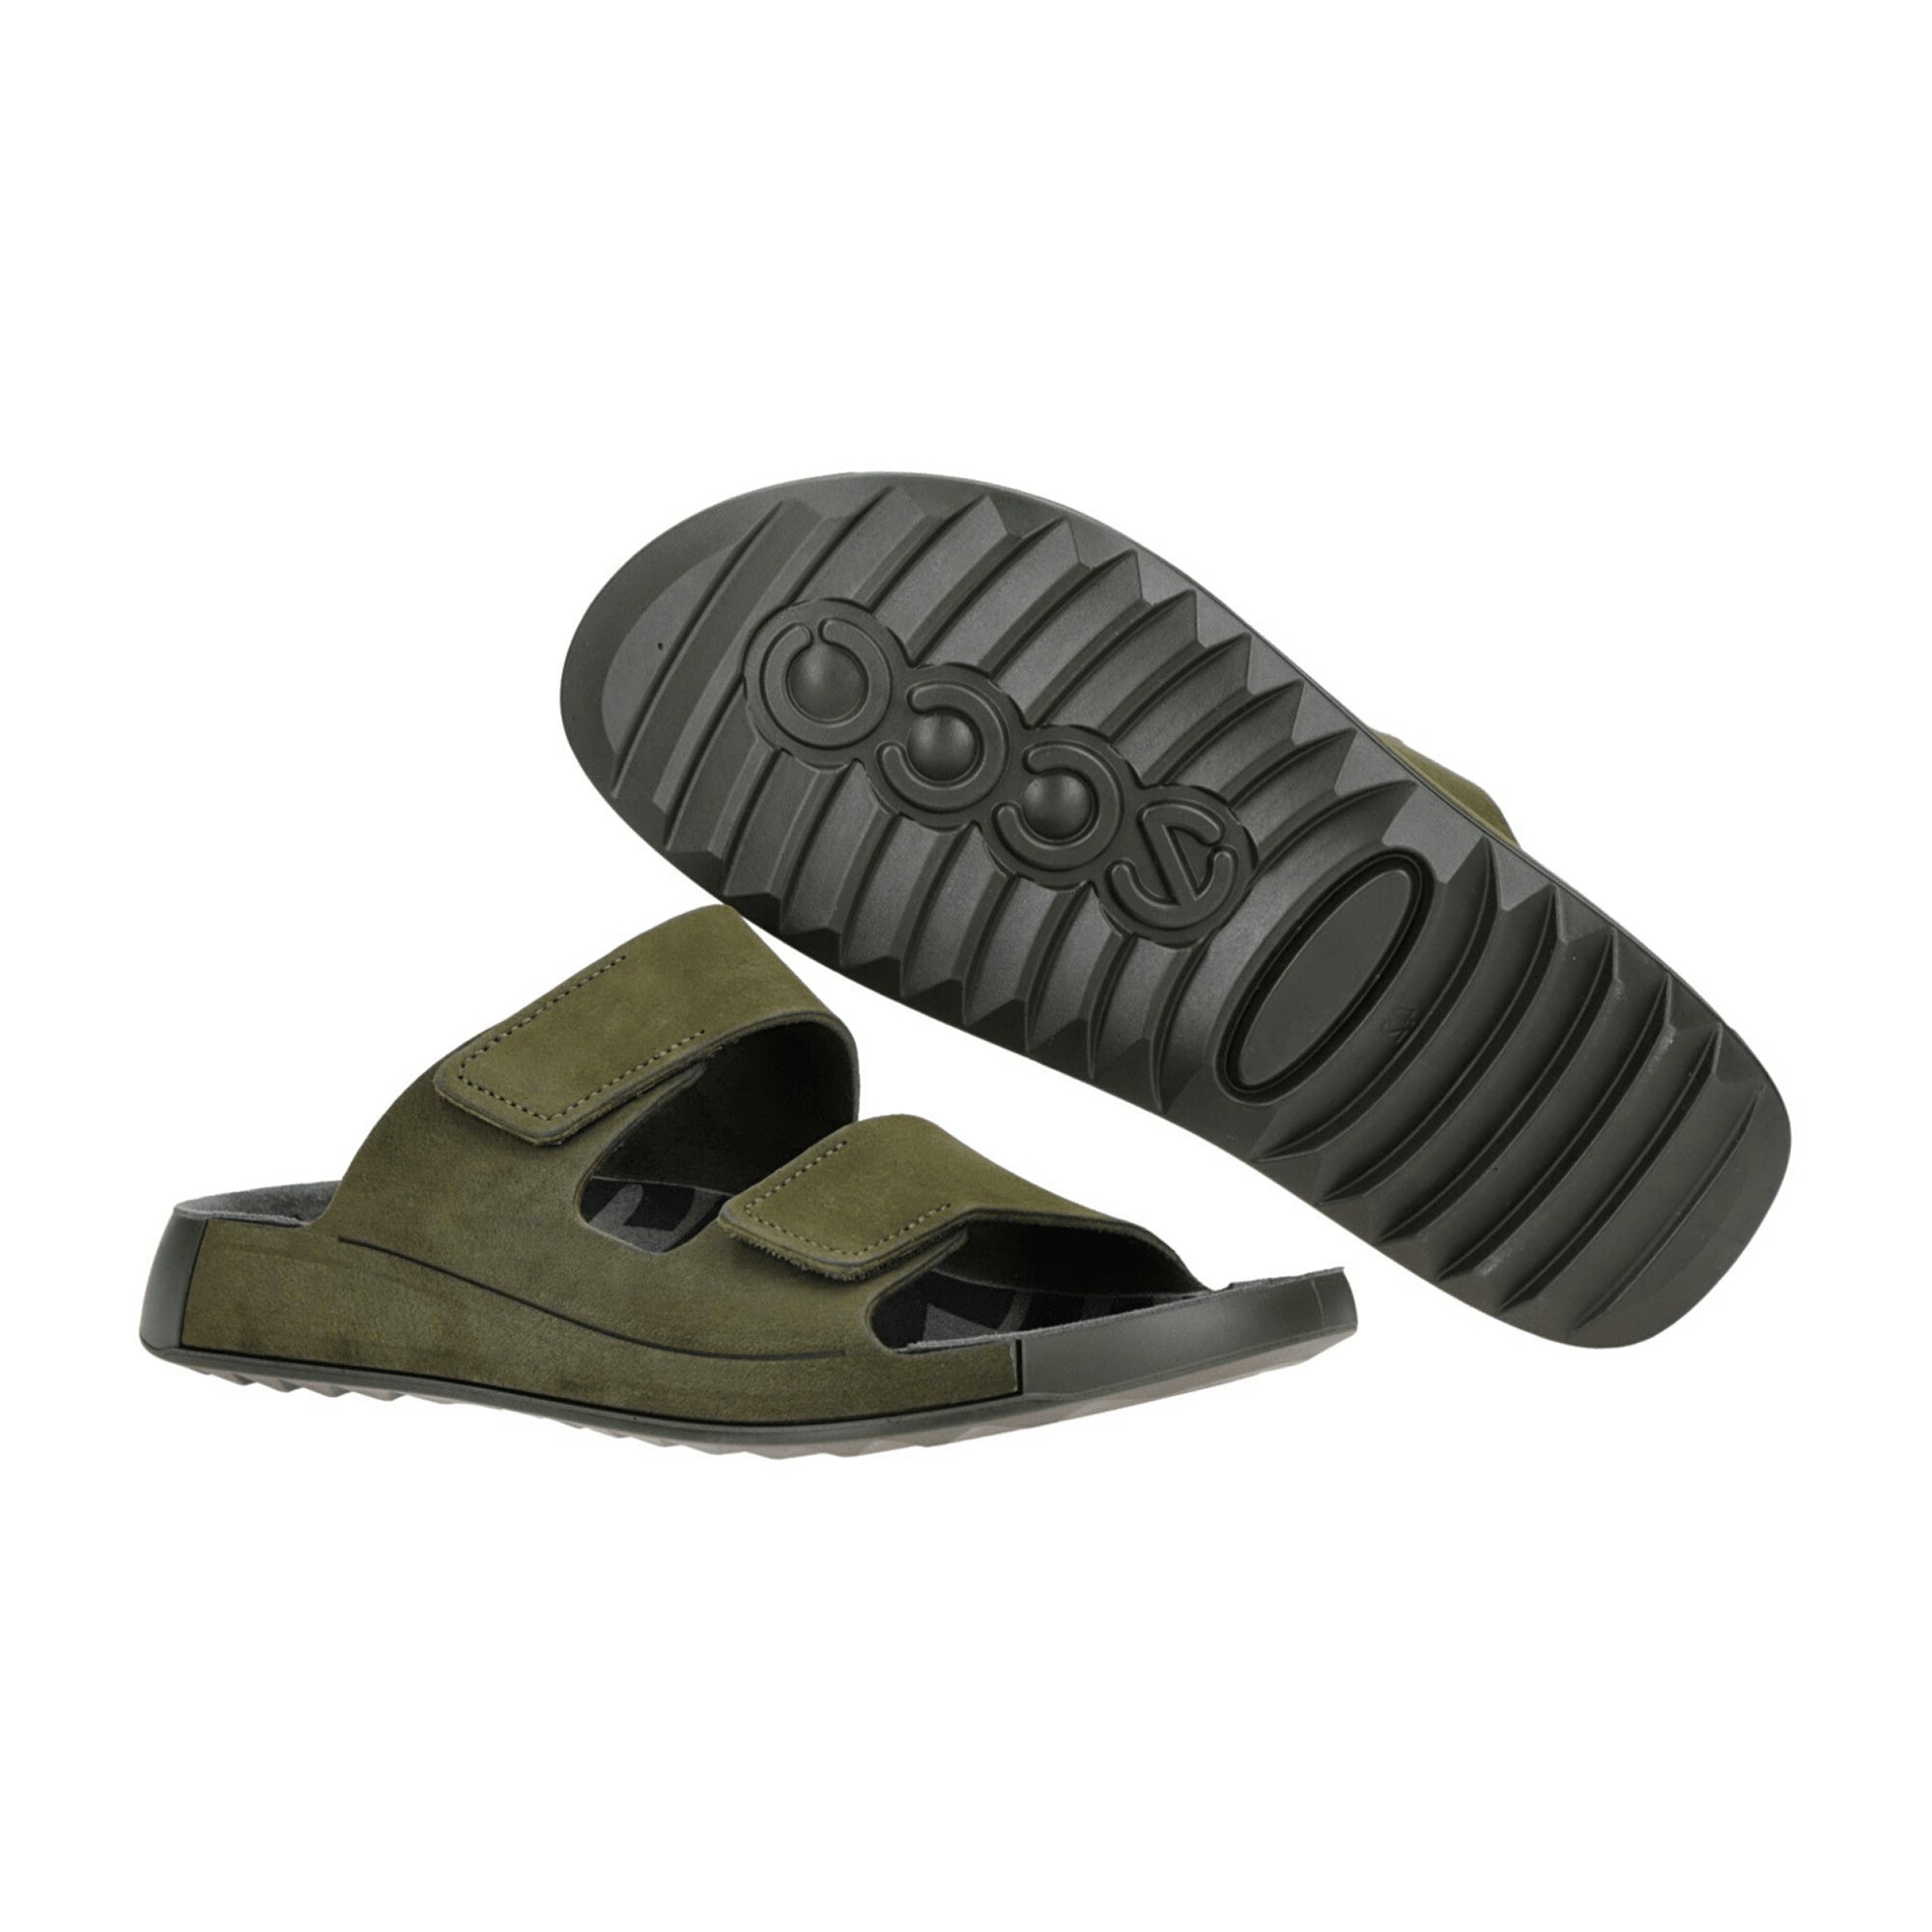 Ecco 2nd Cozmo M Men's Sandals in Grape Leaf Green - Stylish & Durable